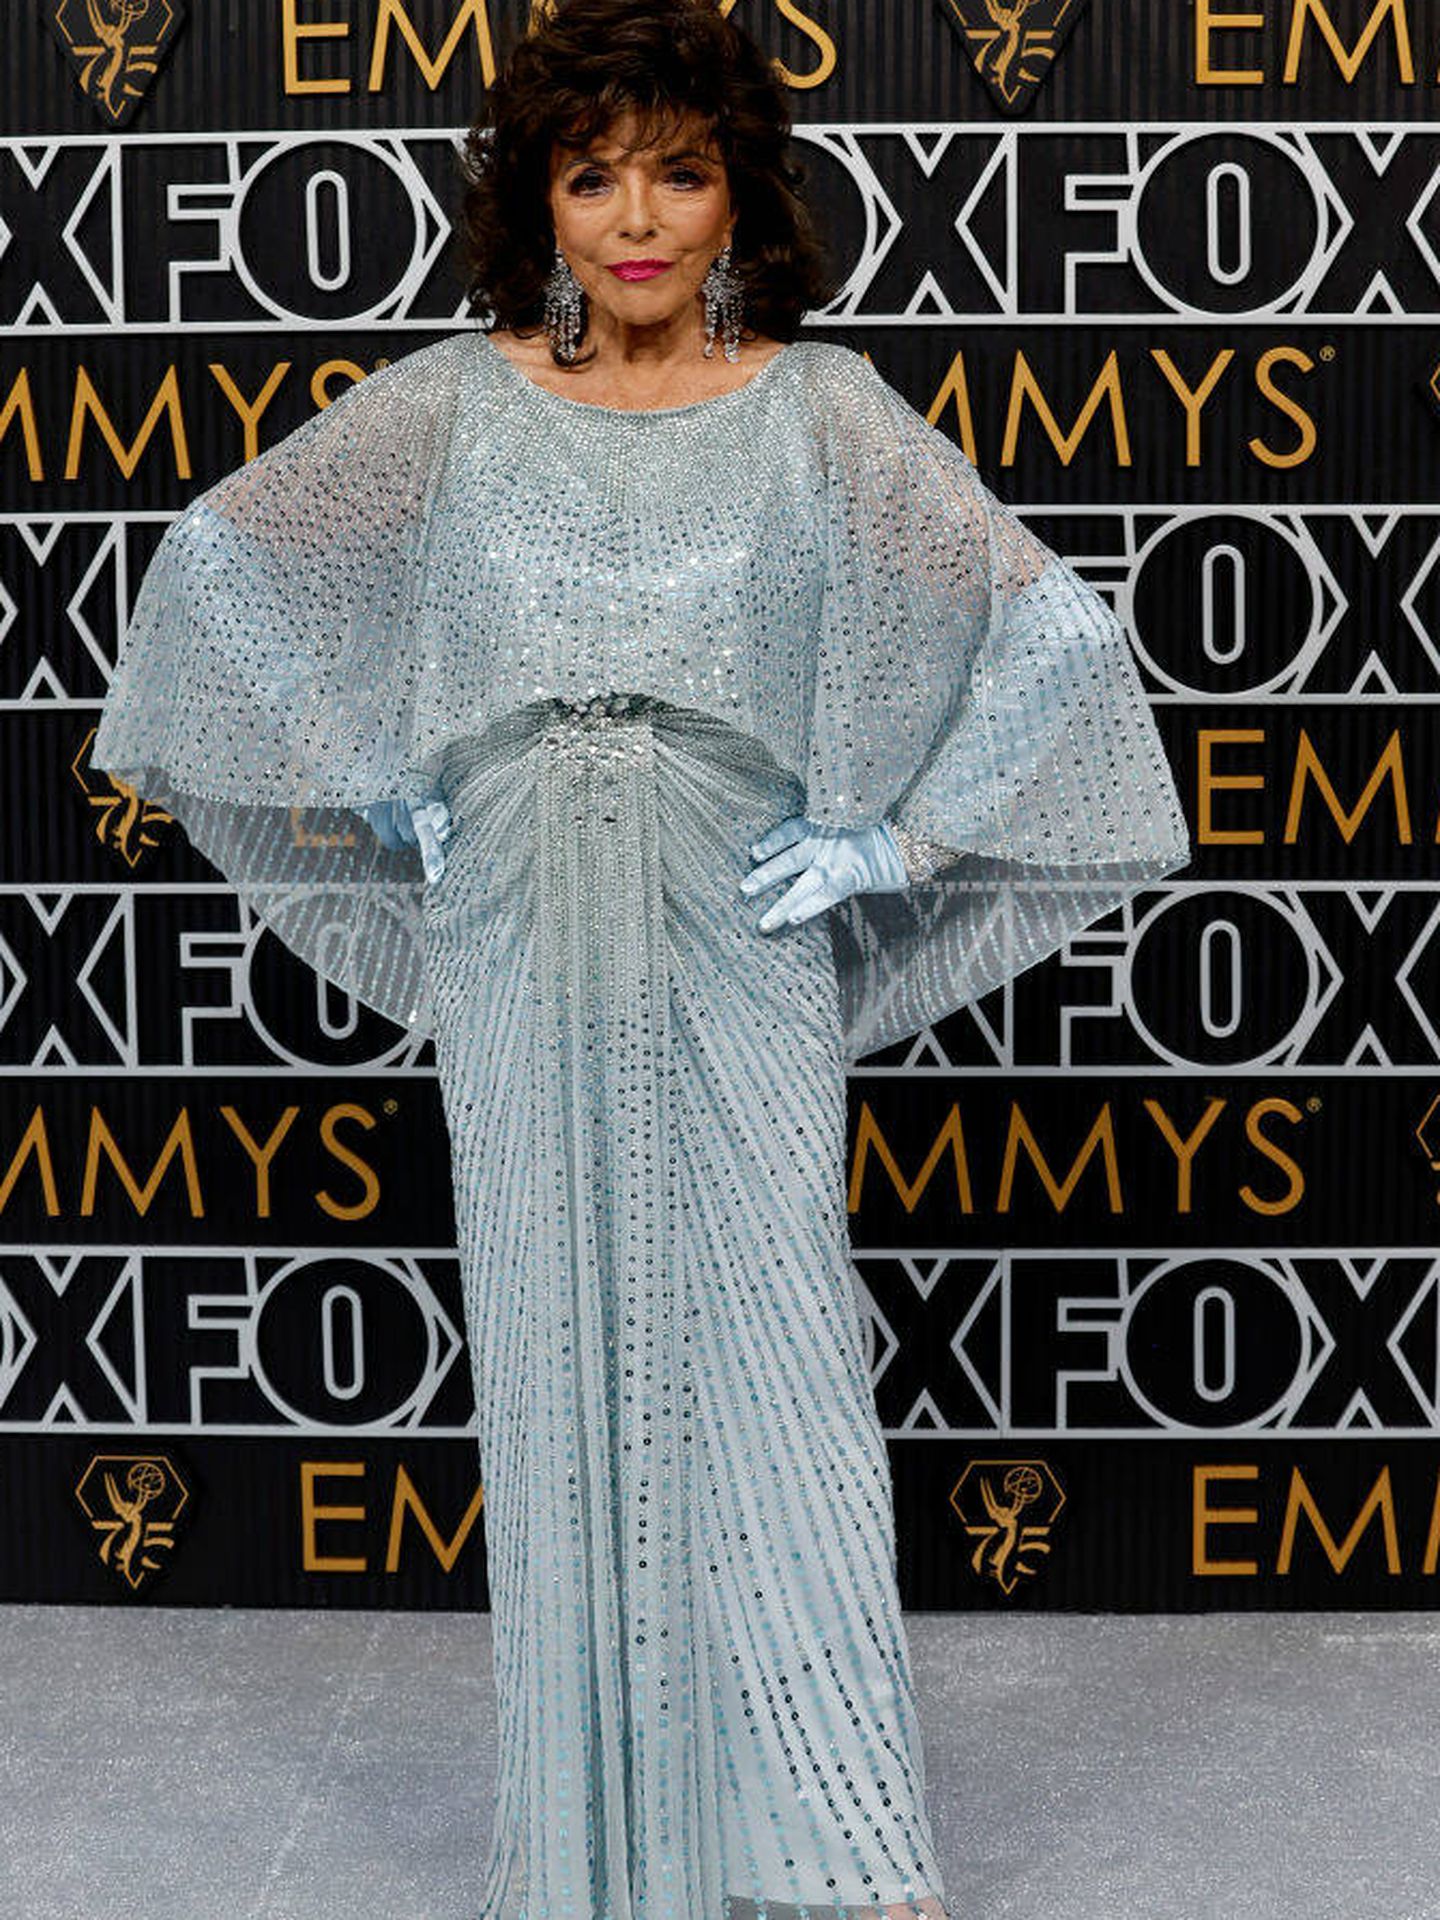 Joan Collins. (Getty Images)